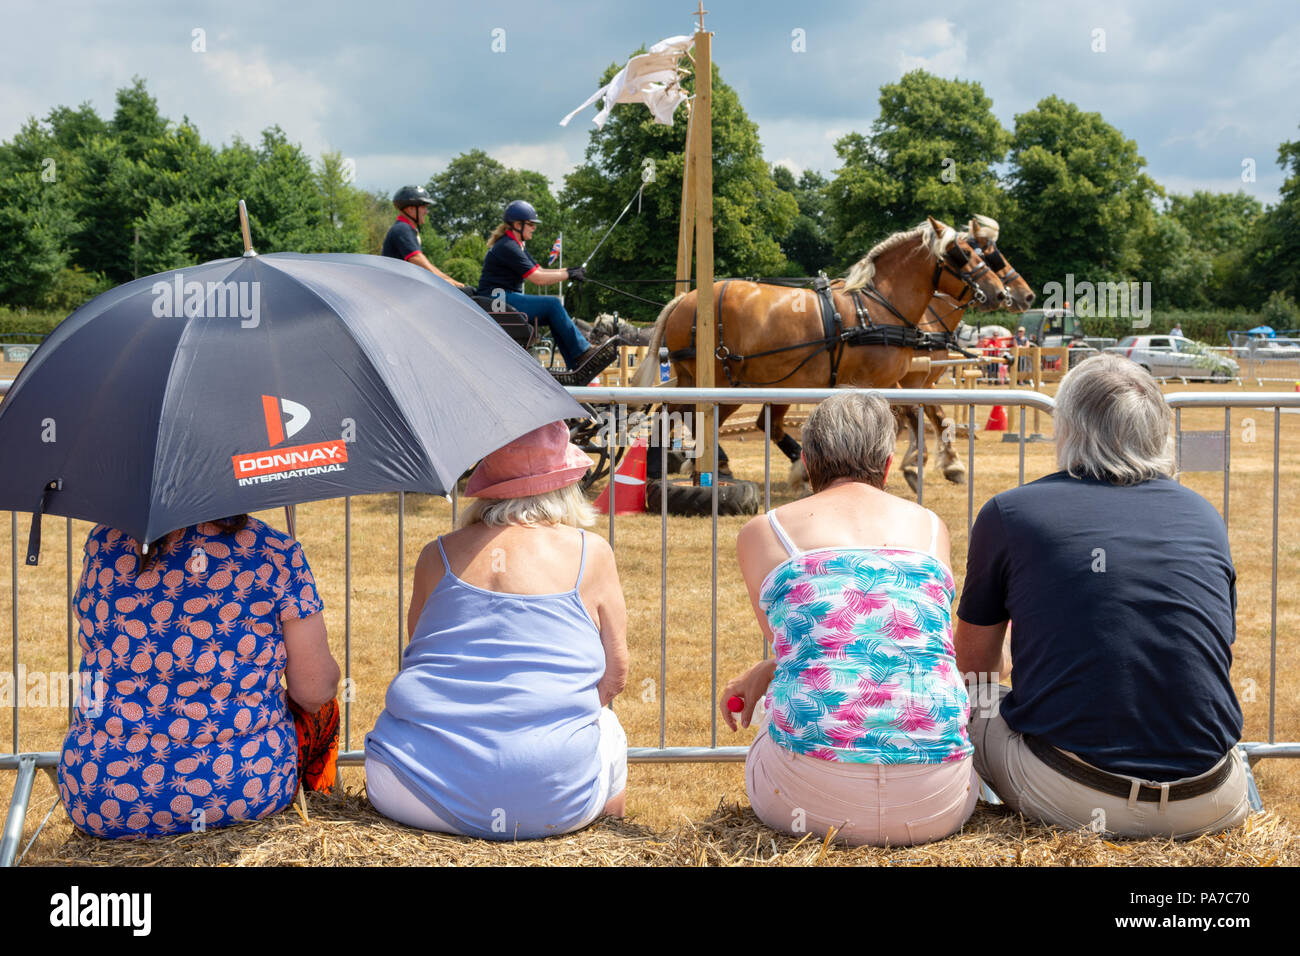 People sitting on hay bales watching a heavy horse event at a country fair in Hampshire, UK, in hot summer sunshine. Two people sit under a large sun umbrella for shade. Stock Photo